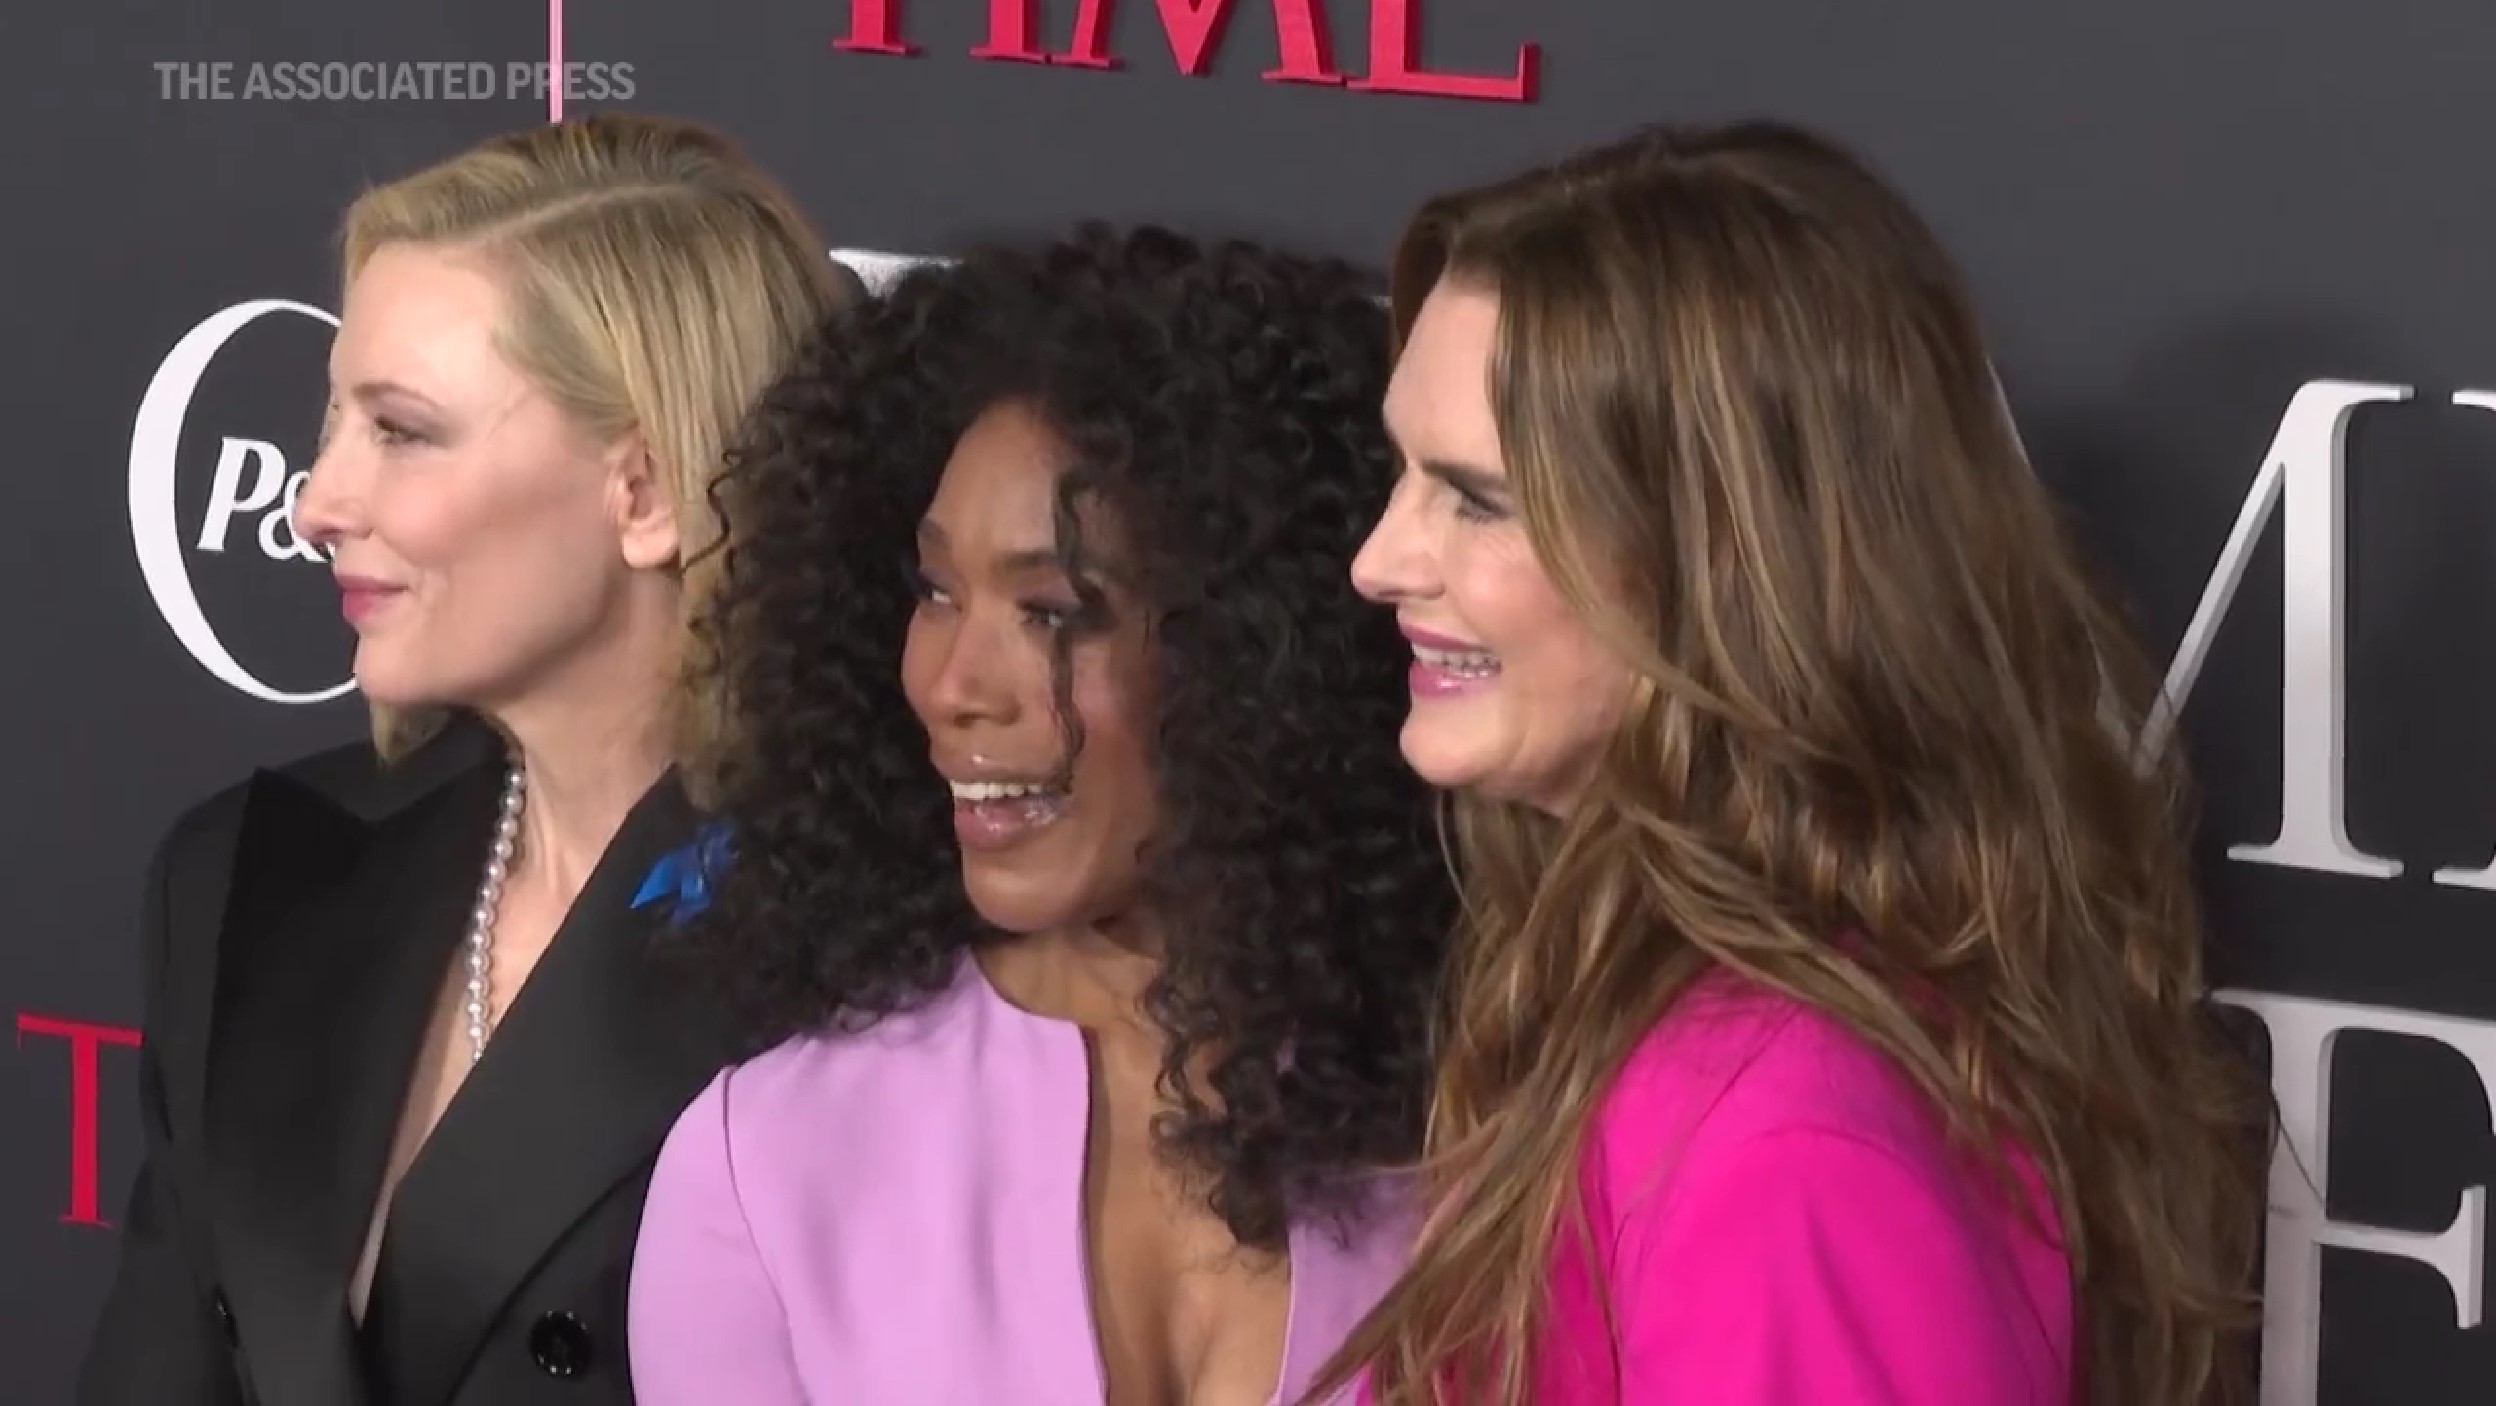 (left to right) Actors Cate Blanchett, Angela Bassett, and Brooke Shields standing together on the red carpet for the 'TIME Magazine' Women of the Year event. Cate is blonde and is wearing a black tuxedo jacket and pearls. Angela has shoulder-length curly Black hair and is wearing a purplish-pink suit with a low neckline. Brooke has long, brown hair, and is wearing a bright pink blazer. We see them all from the shoulders up, and they're all facing left and smiling.